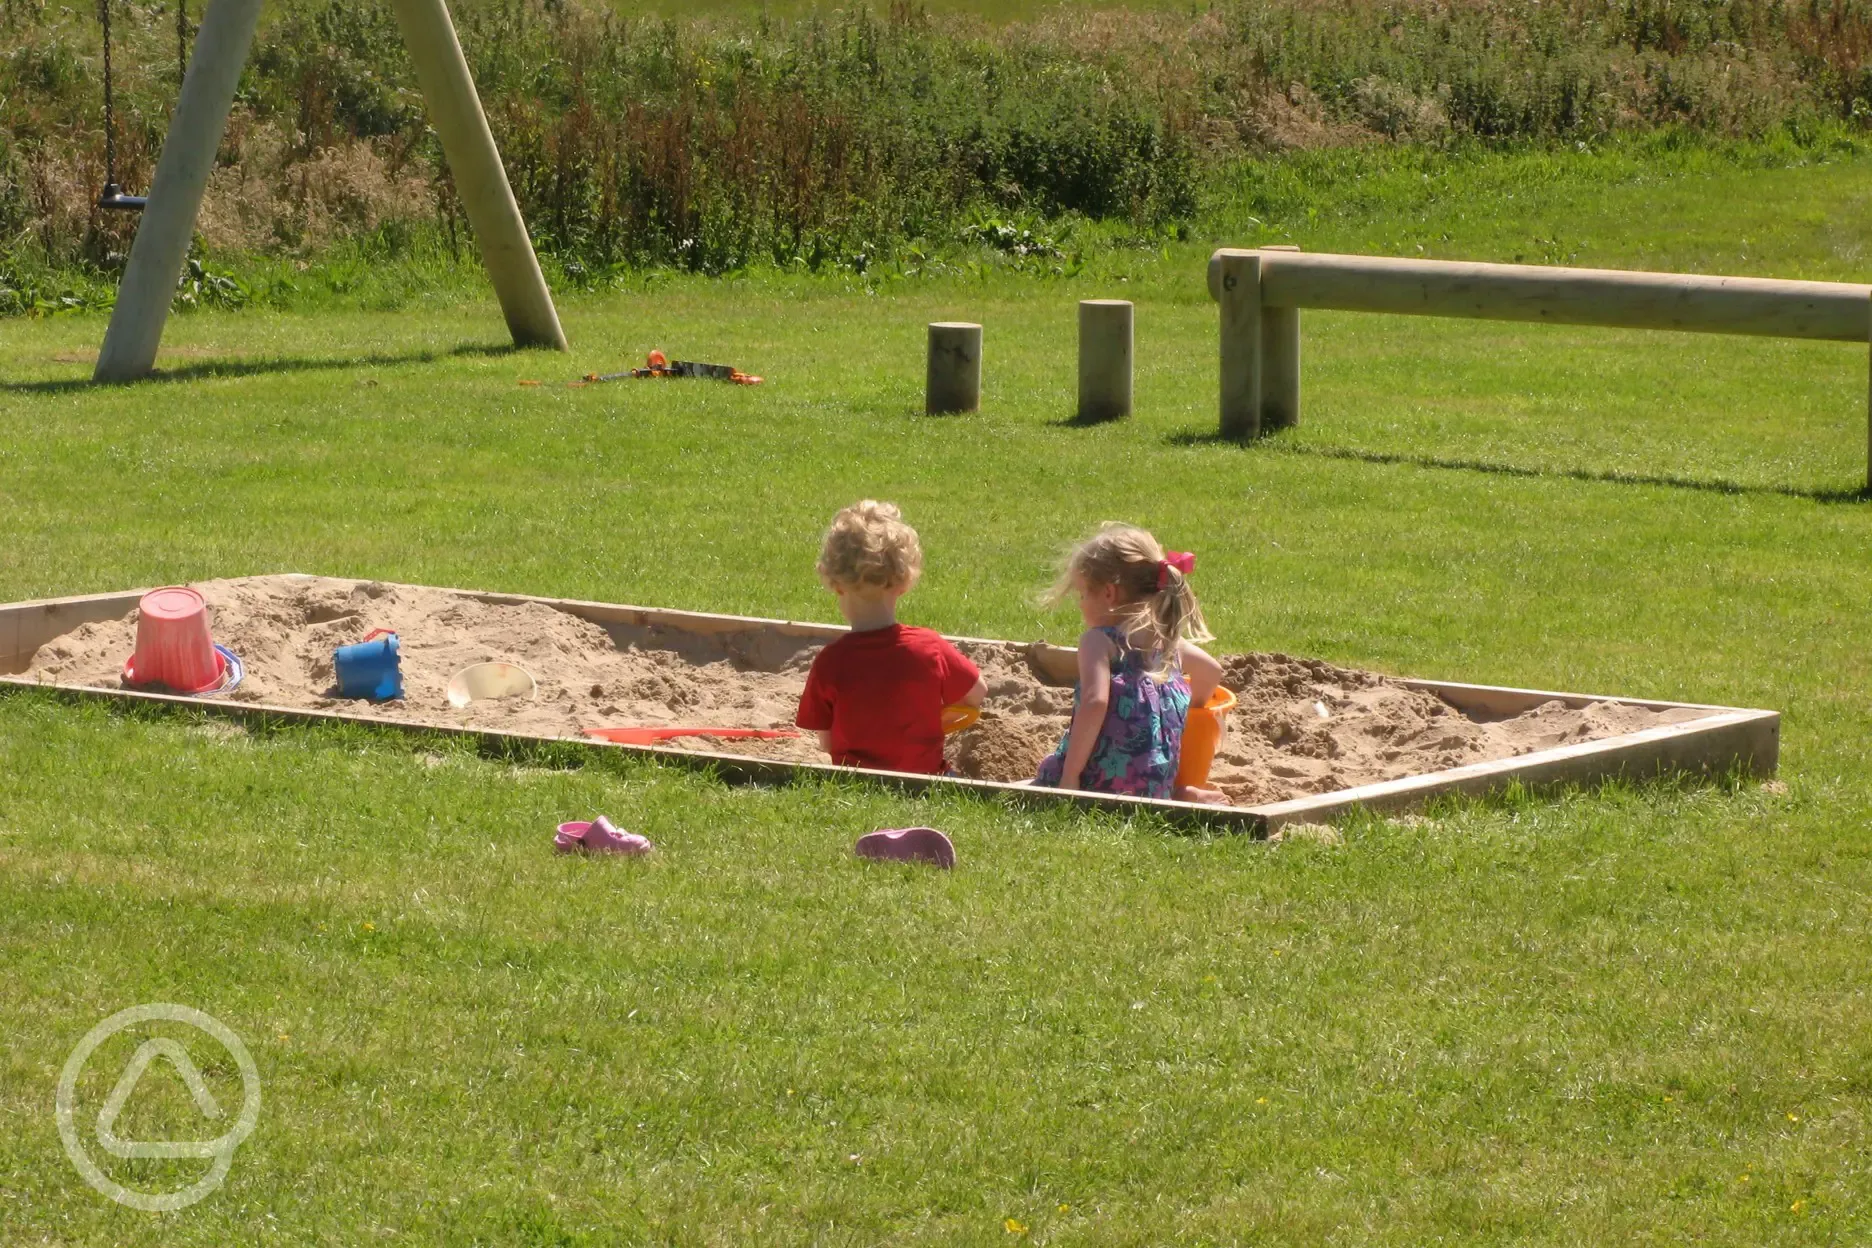 Hours of fun in the sand pit for little children